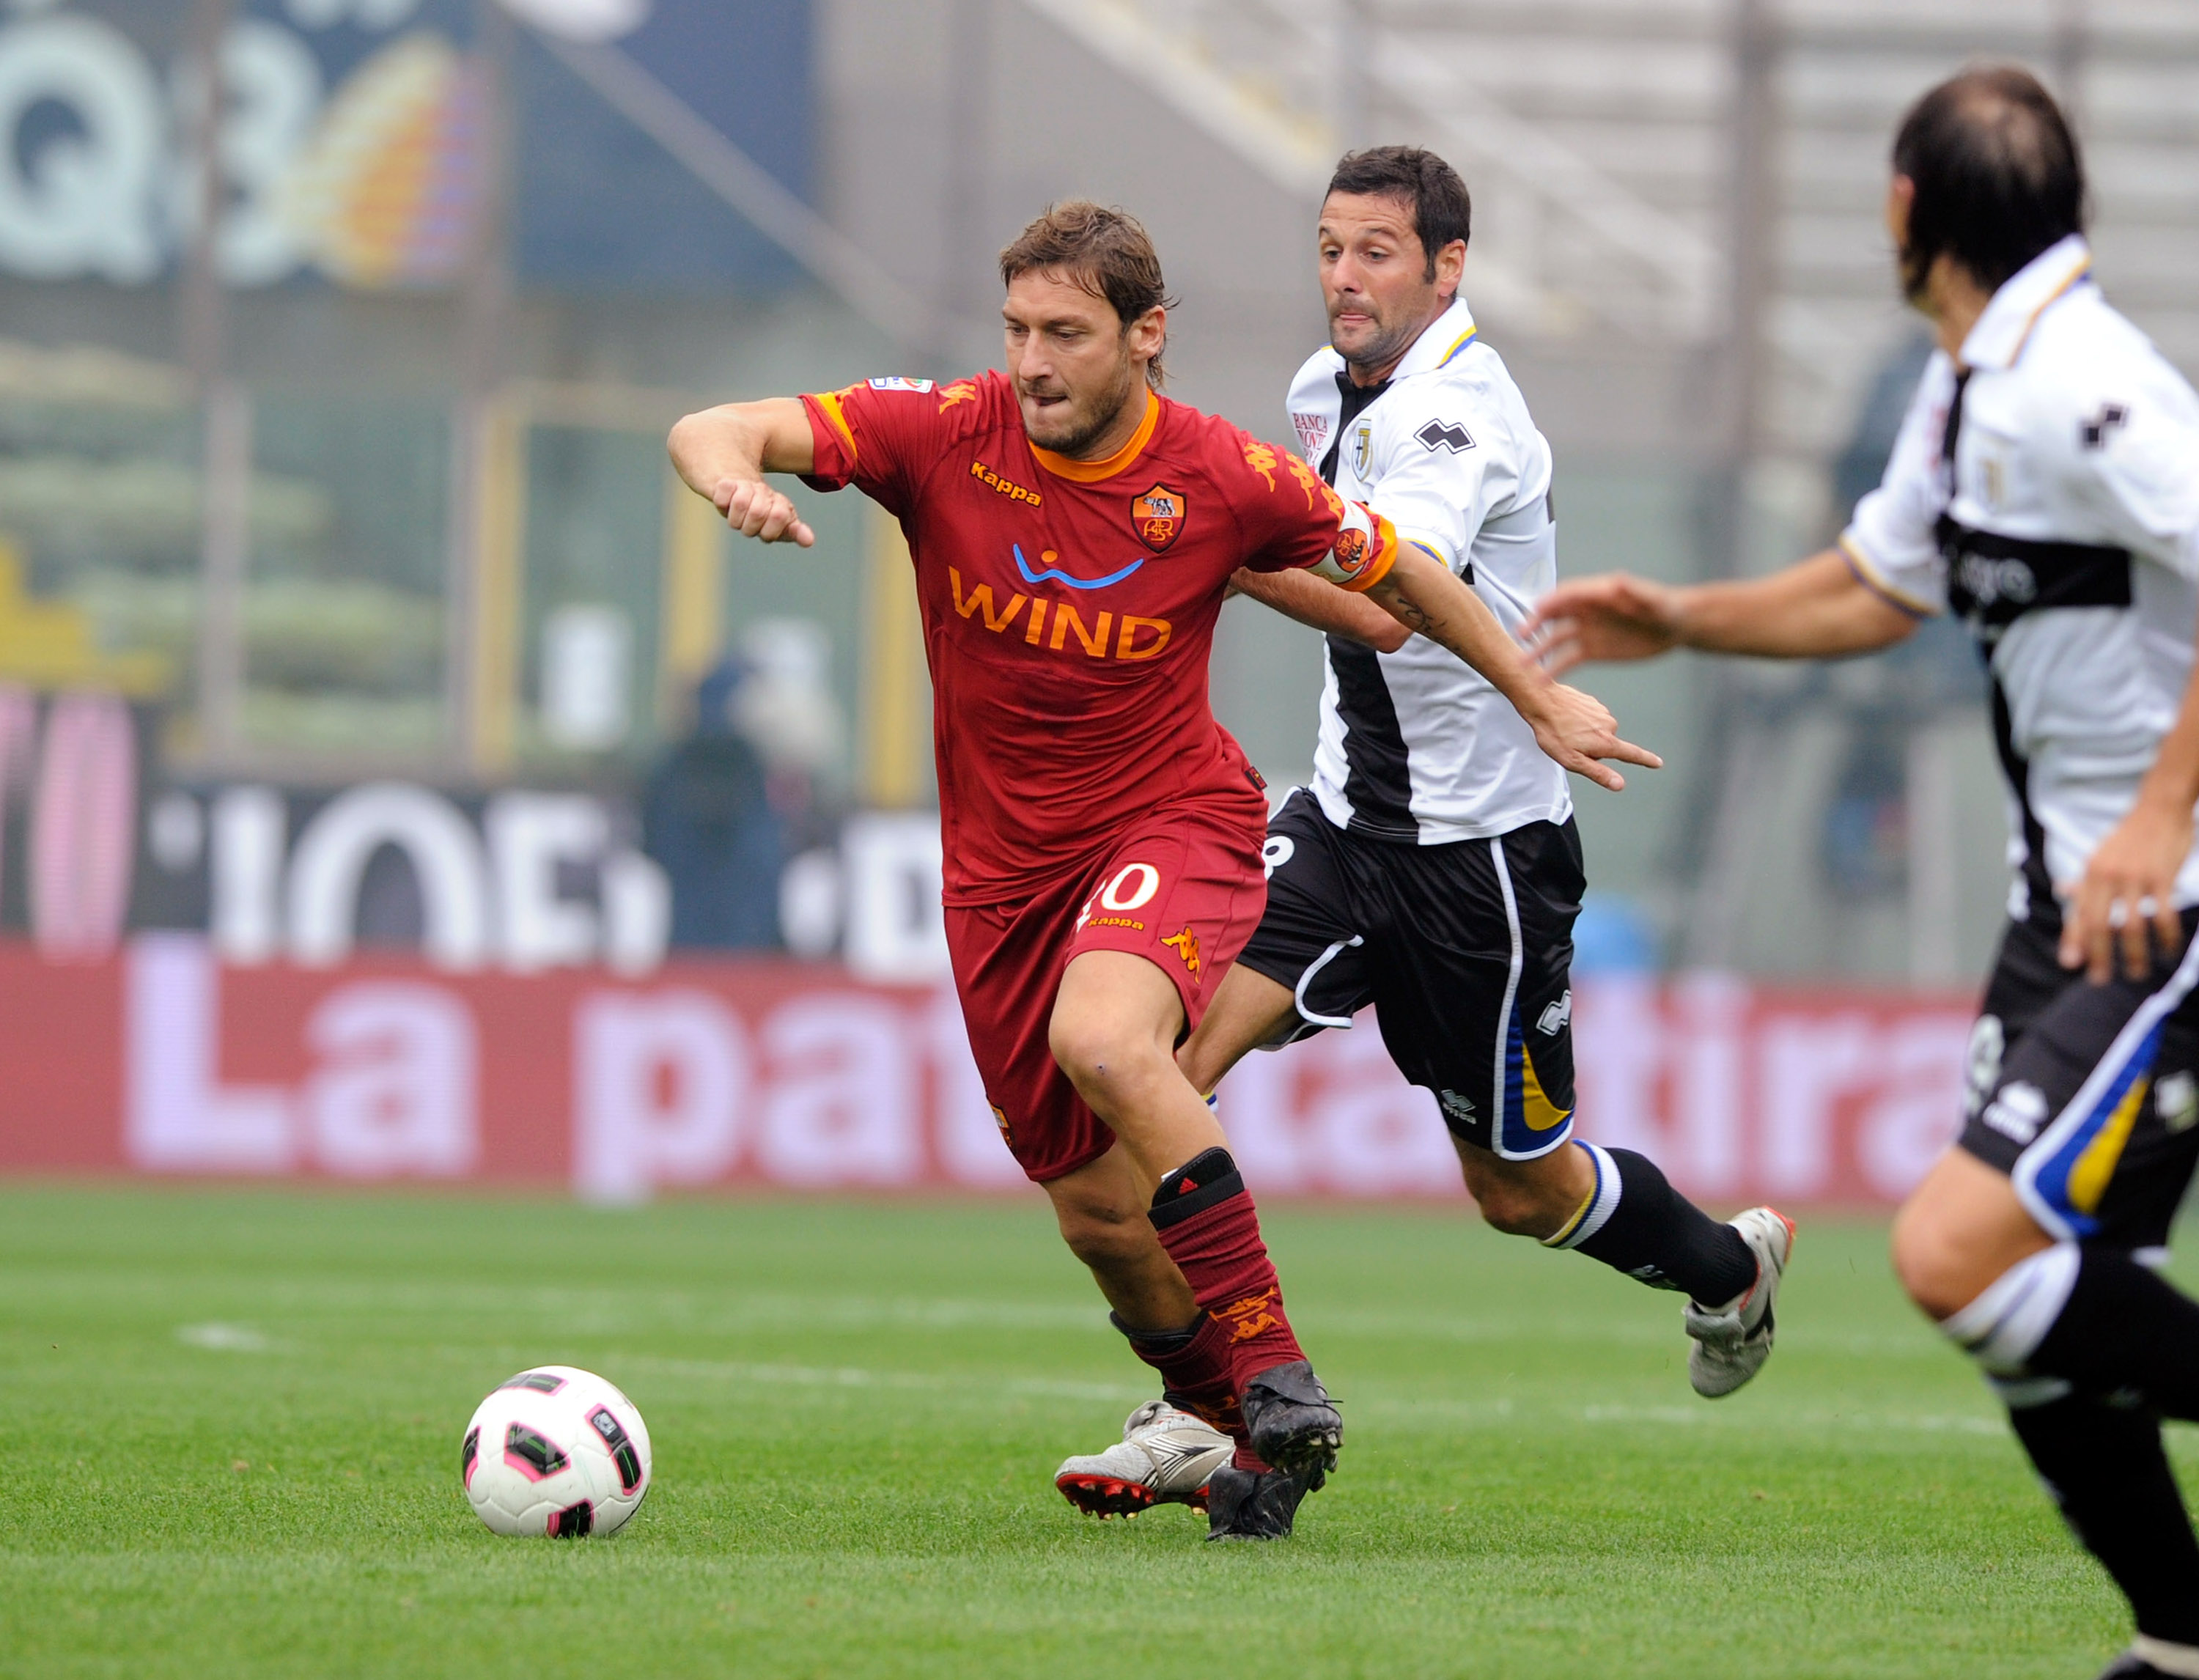 Francesco Totti could not lead Roma to victory against Parma.